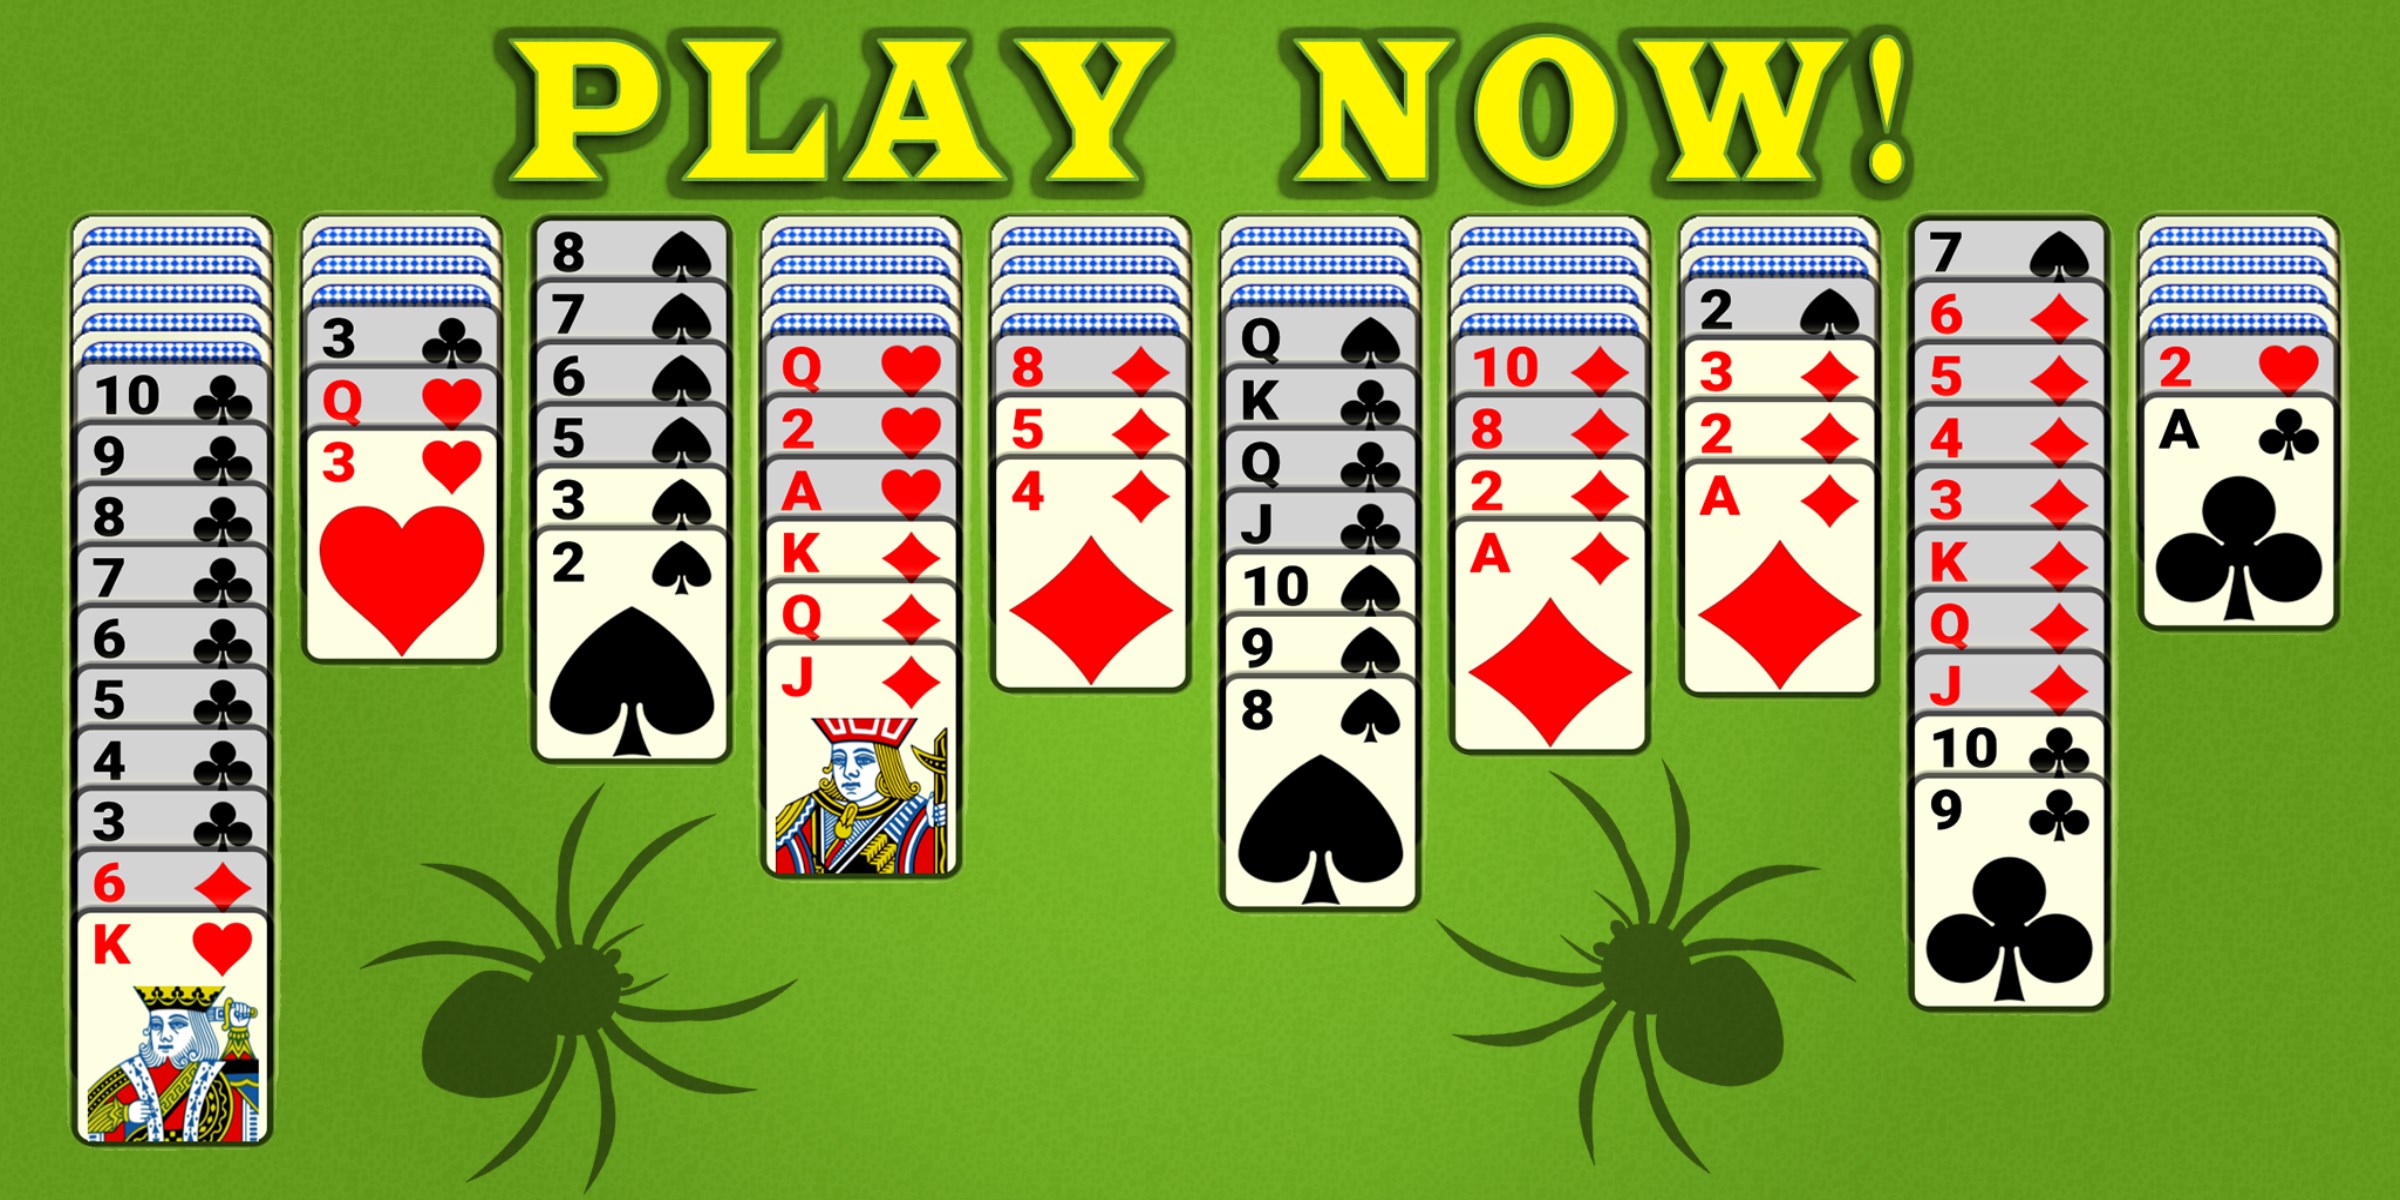 microsoft spider solitaire free game